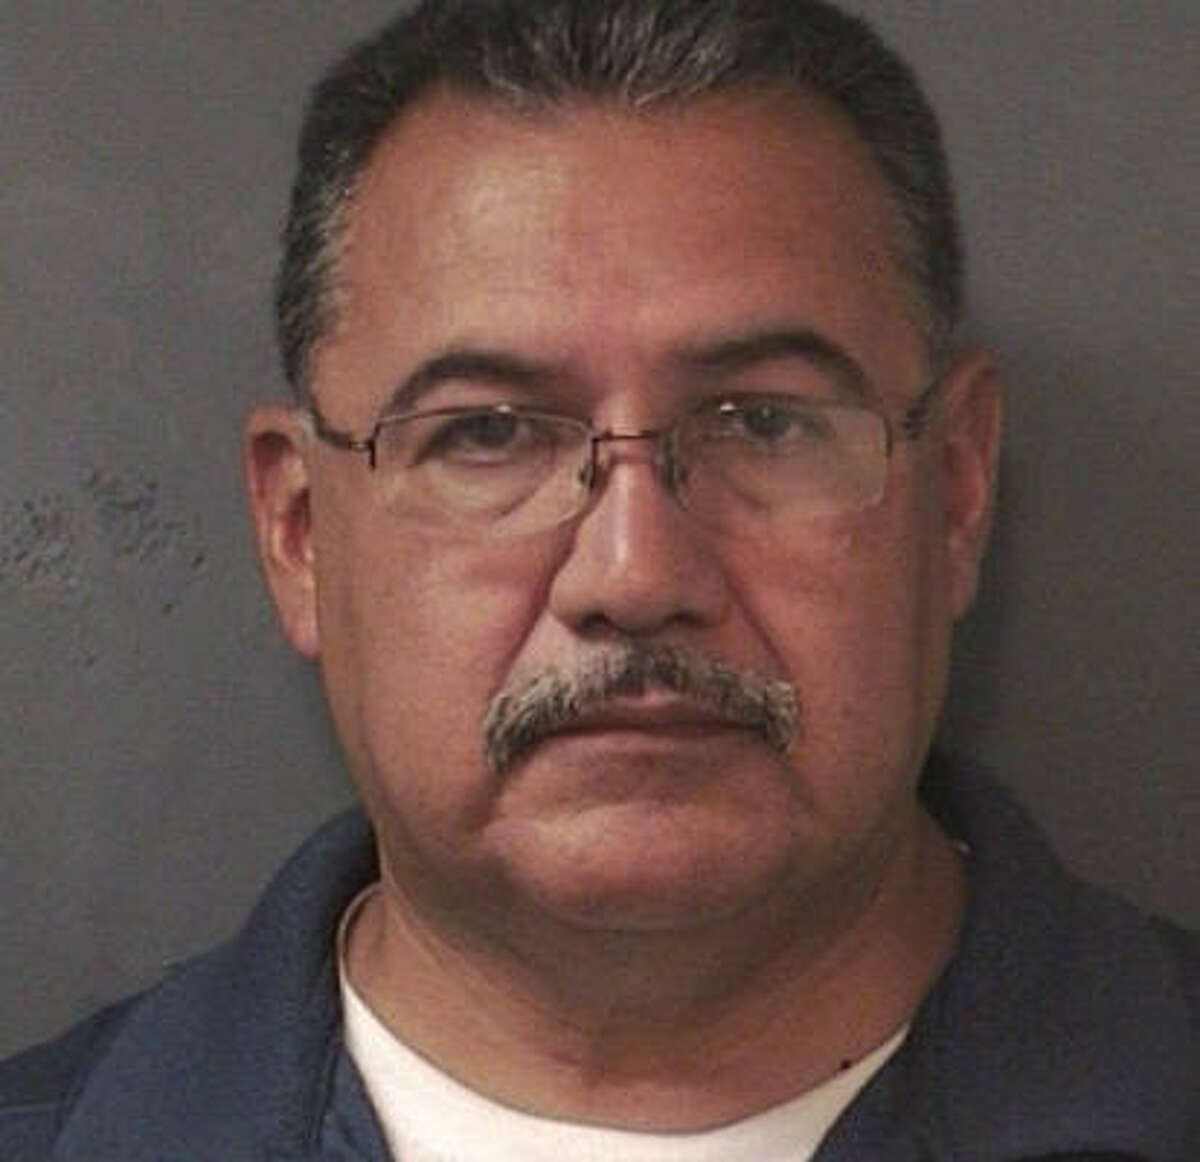 Frank Aguilar, 52, is free on a $1,500 bond after being arrested Wednesday for assault of a family member, a class A misdemeanor, according to court records.